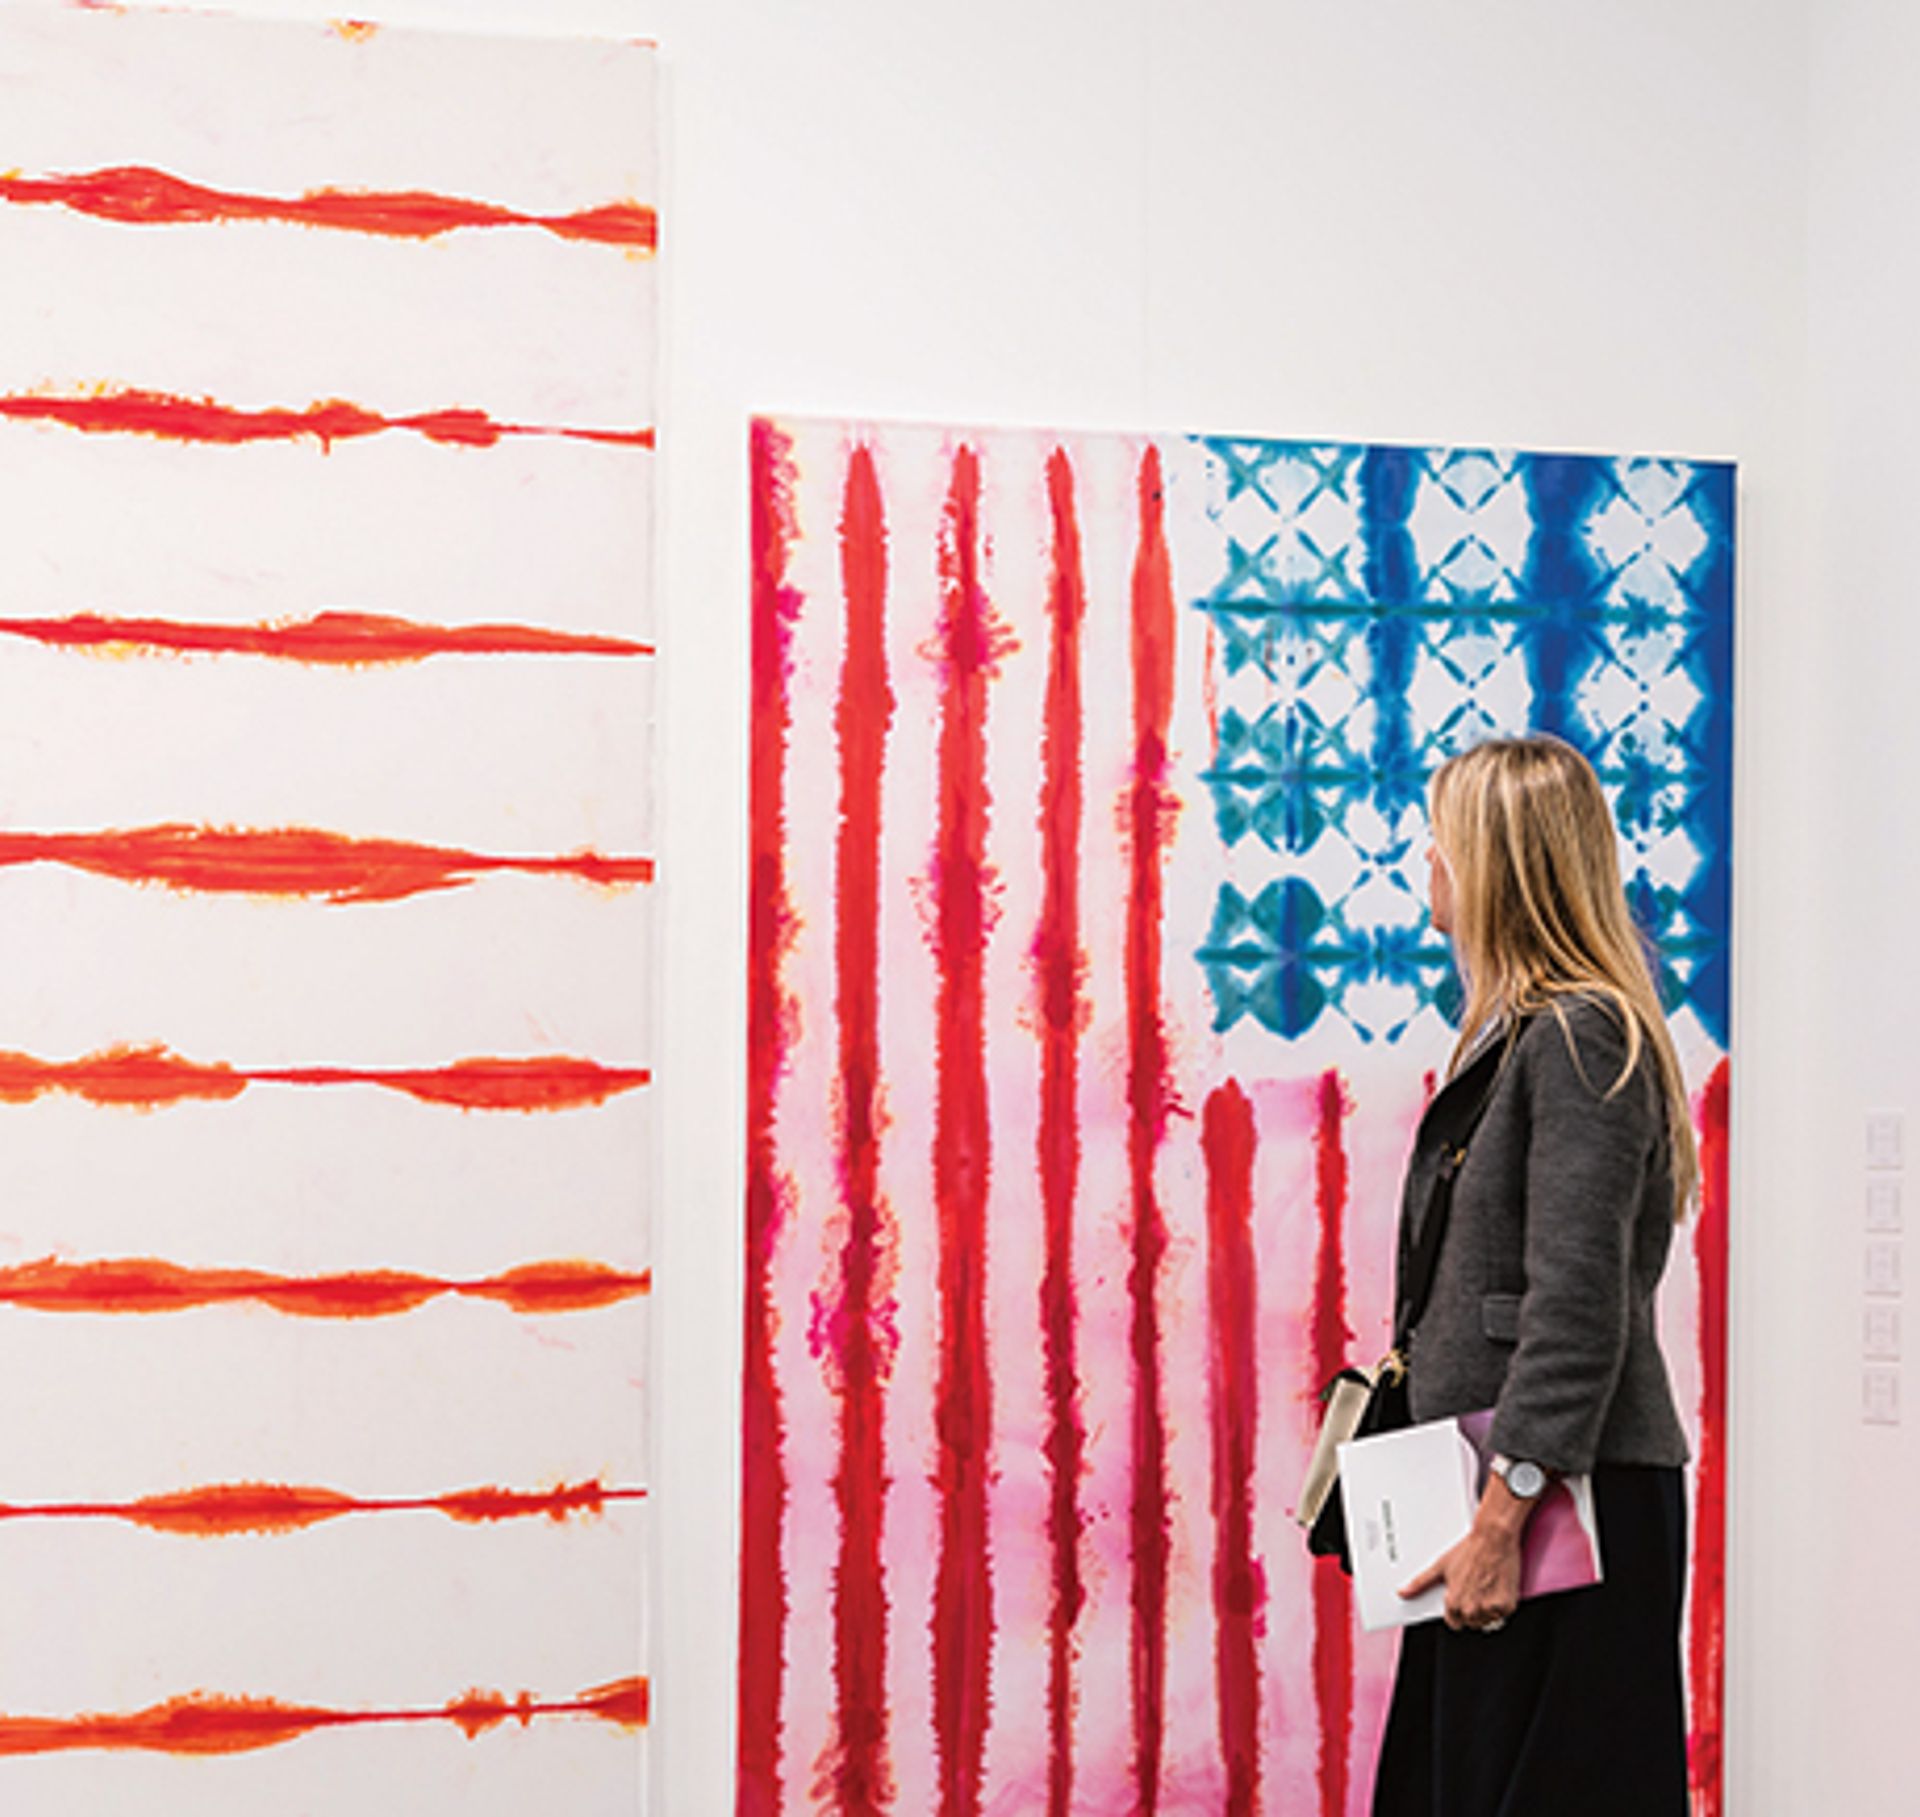 Not so star-spangled banner: In the aftermath of the UK’s withdrawal from the European Union, collectors from the US face additional bureaucratic challenges and costs, including those arising after value-added tax (VAT) concessions were abolished. Pictured: Italian gallery Massimo de Carlo’s stand at Frieze London in 2017, which included paintings by the Polish-American artist Piotr Uklański inspired by the the US flag Mark Blower; courtesy of Mark Blower/Frieze